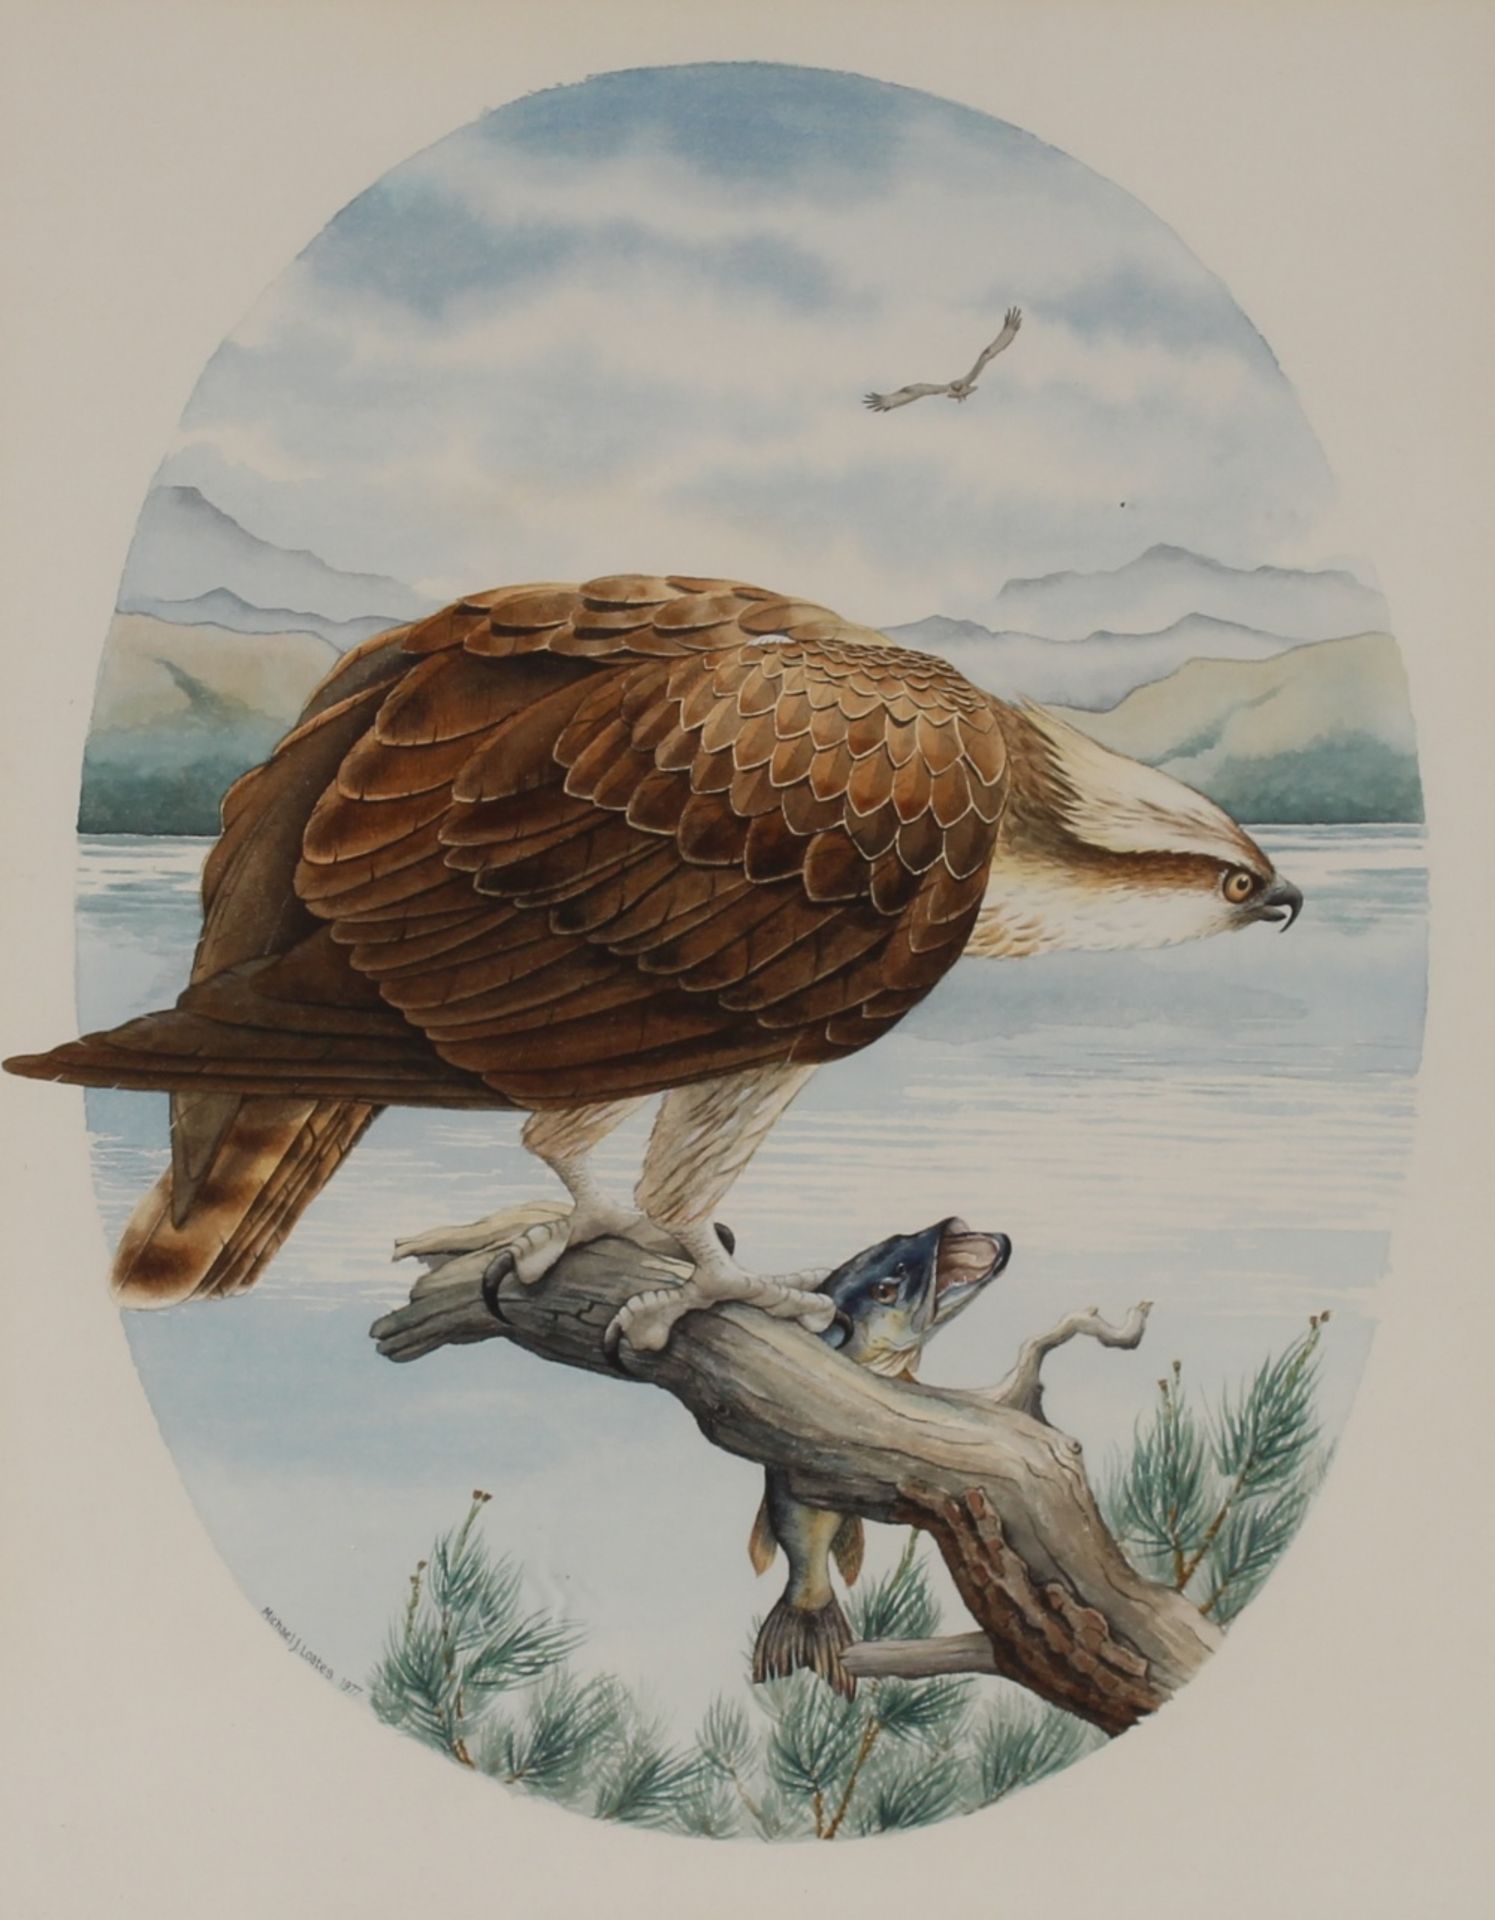 Michael J. Loates, "Osprey and Pike" signed watercolour dated 1977, 37cm x 28cm in extremes